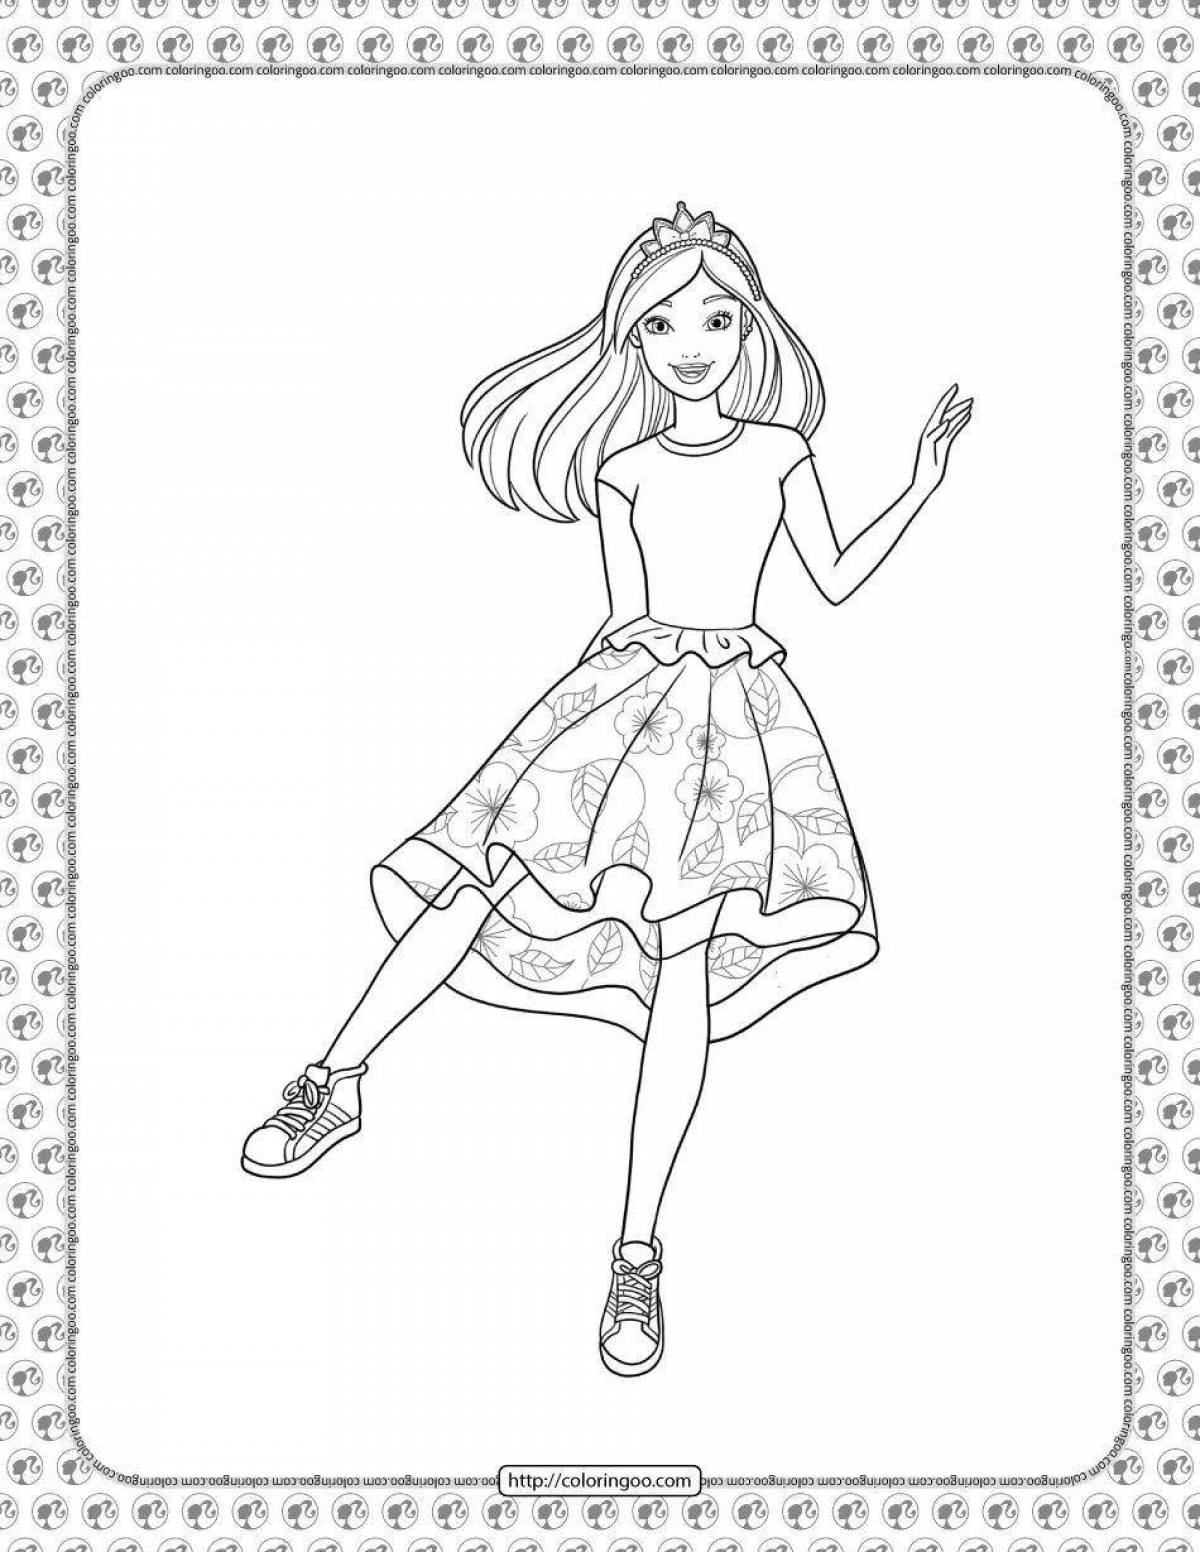 Cute barbie coloring book for kids 5-6 years old